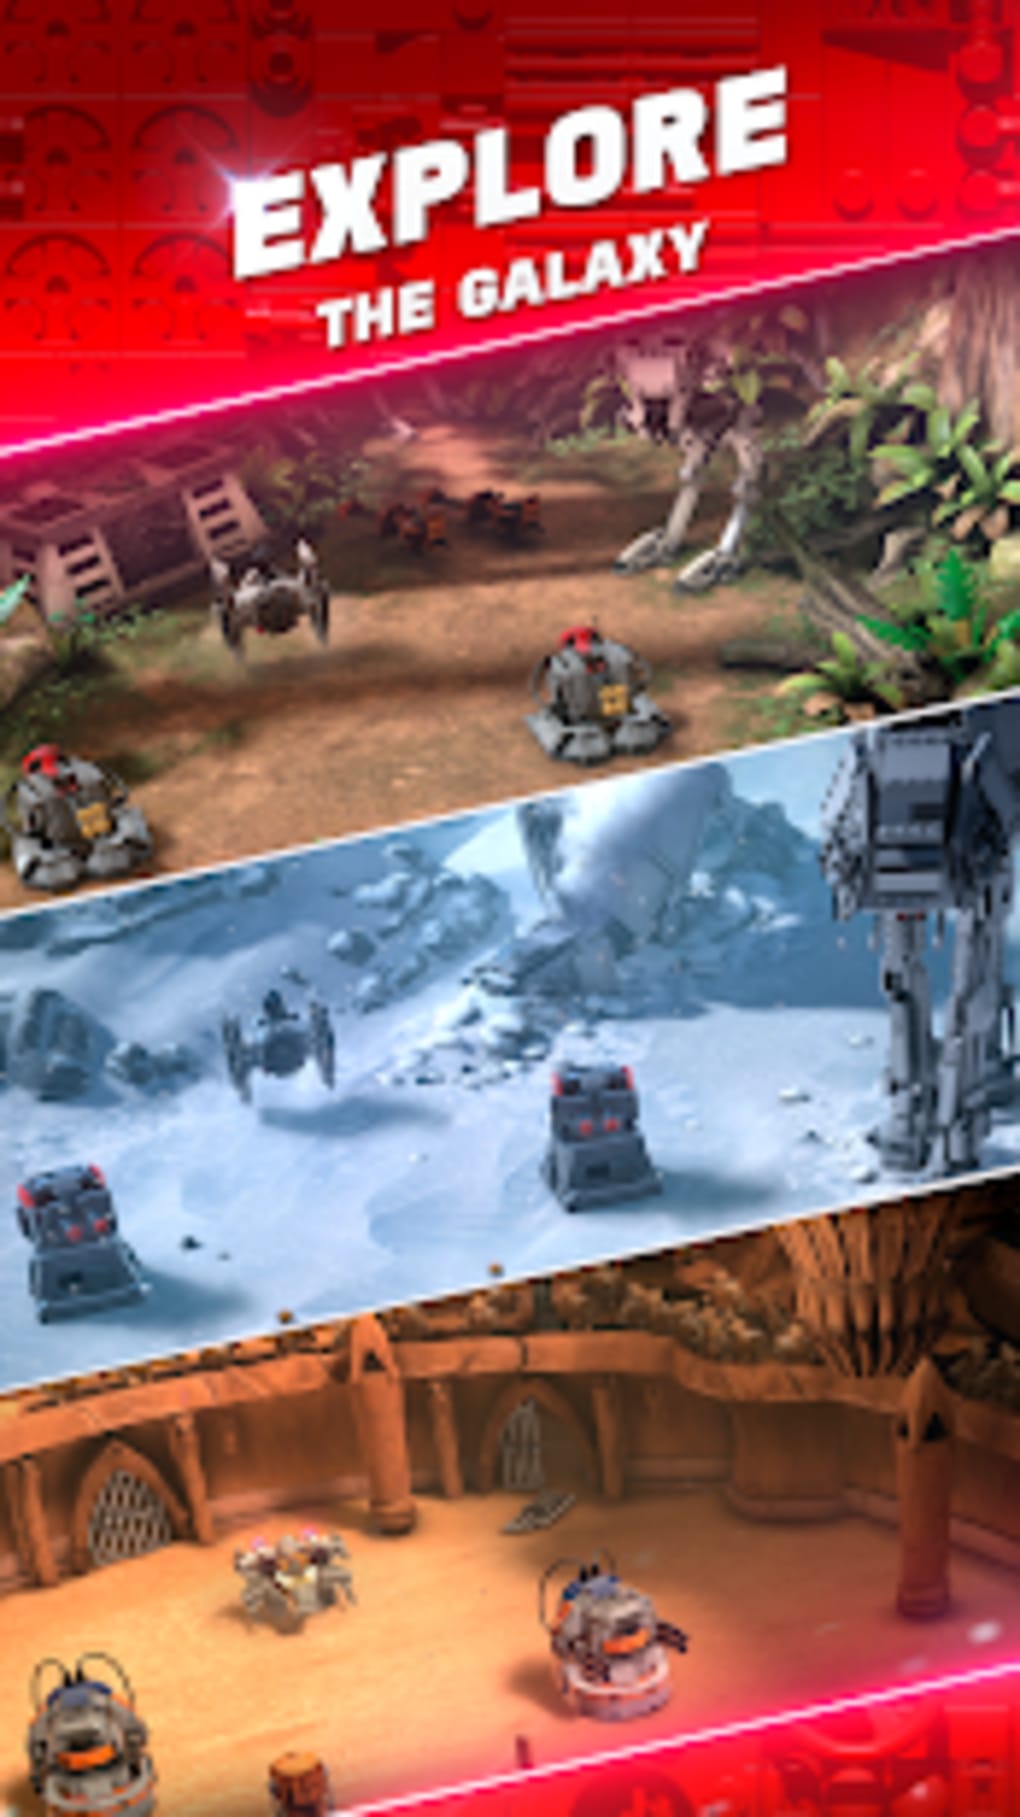 LEGO Star Wars Battles' is a competitive strategy game for mobile